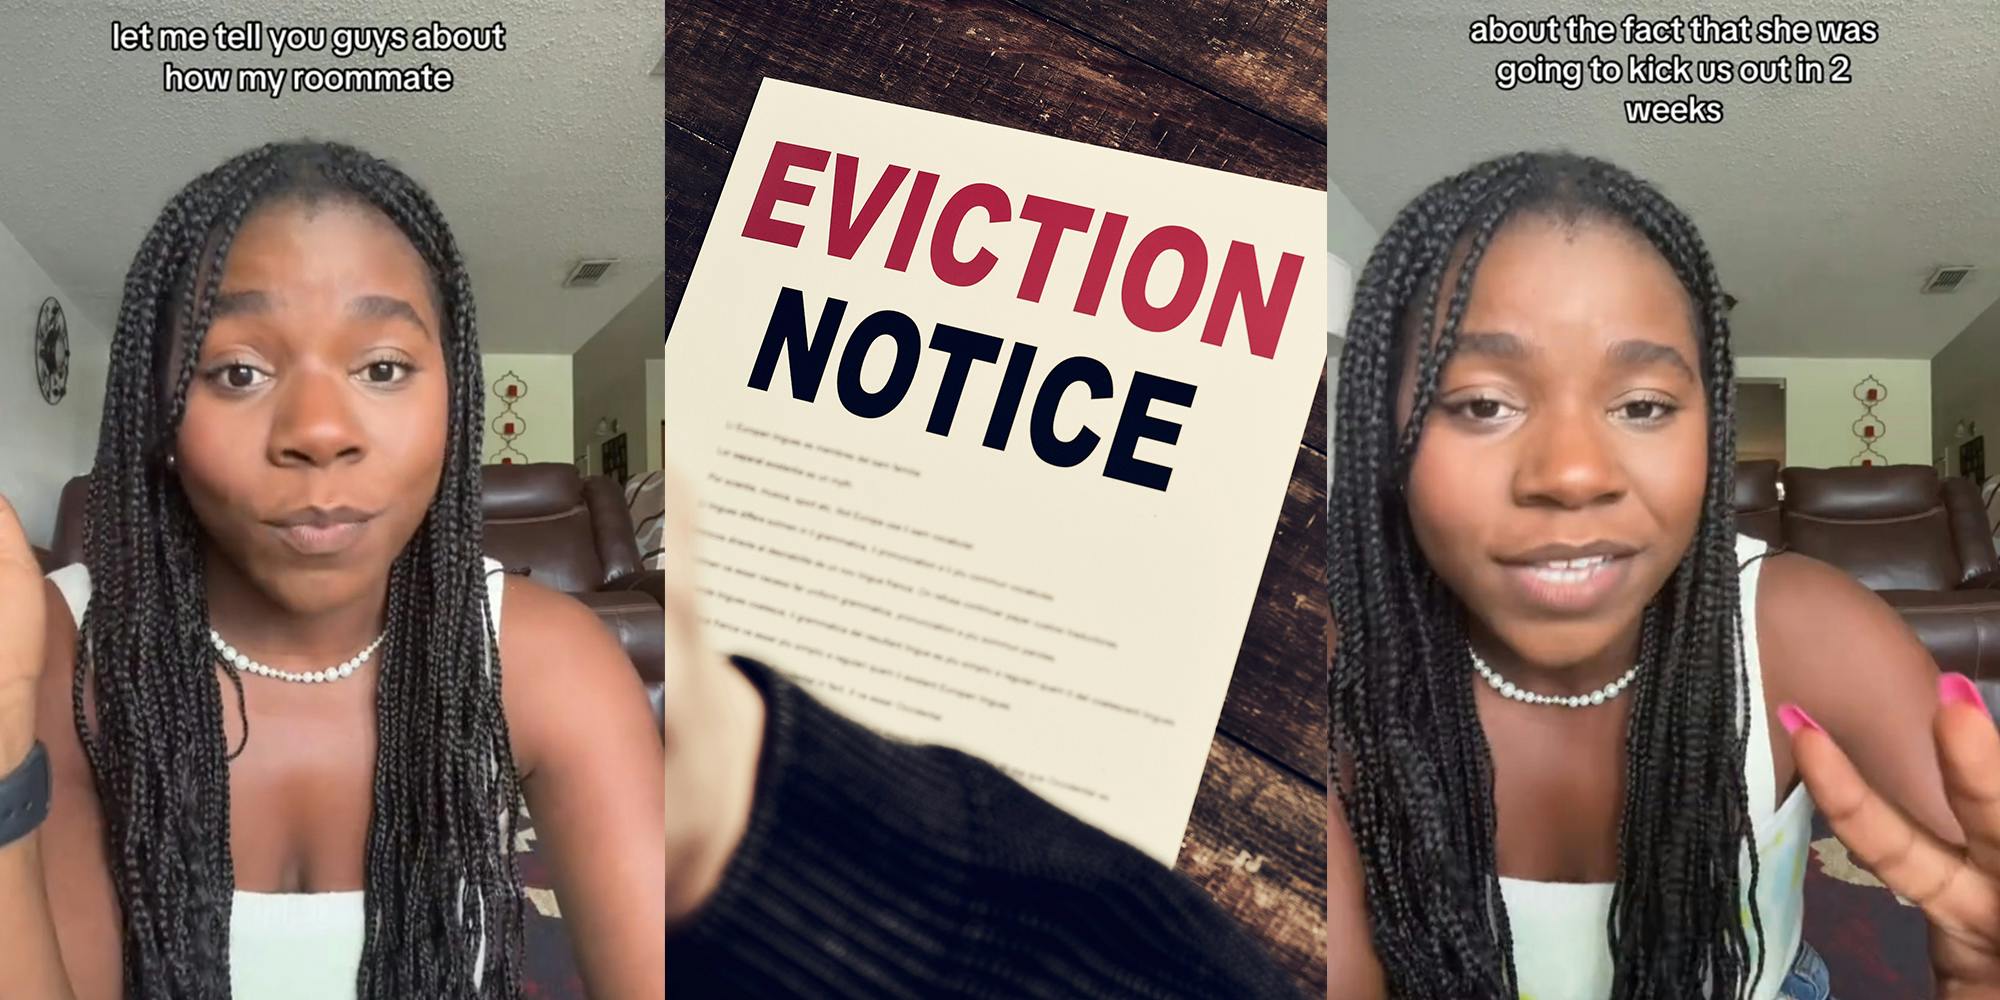 Tenant says her friend, roommate, and landlord kicked her out while they were on vacation together